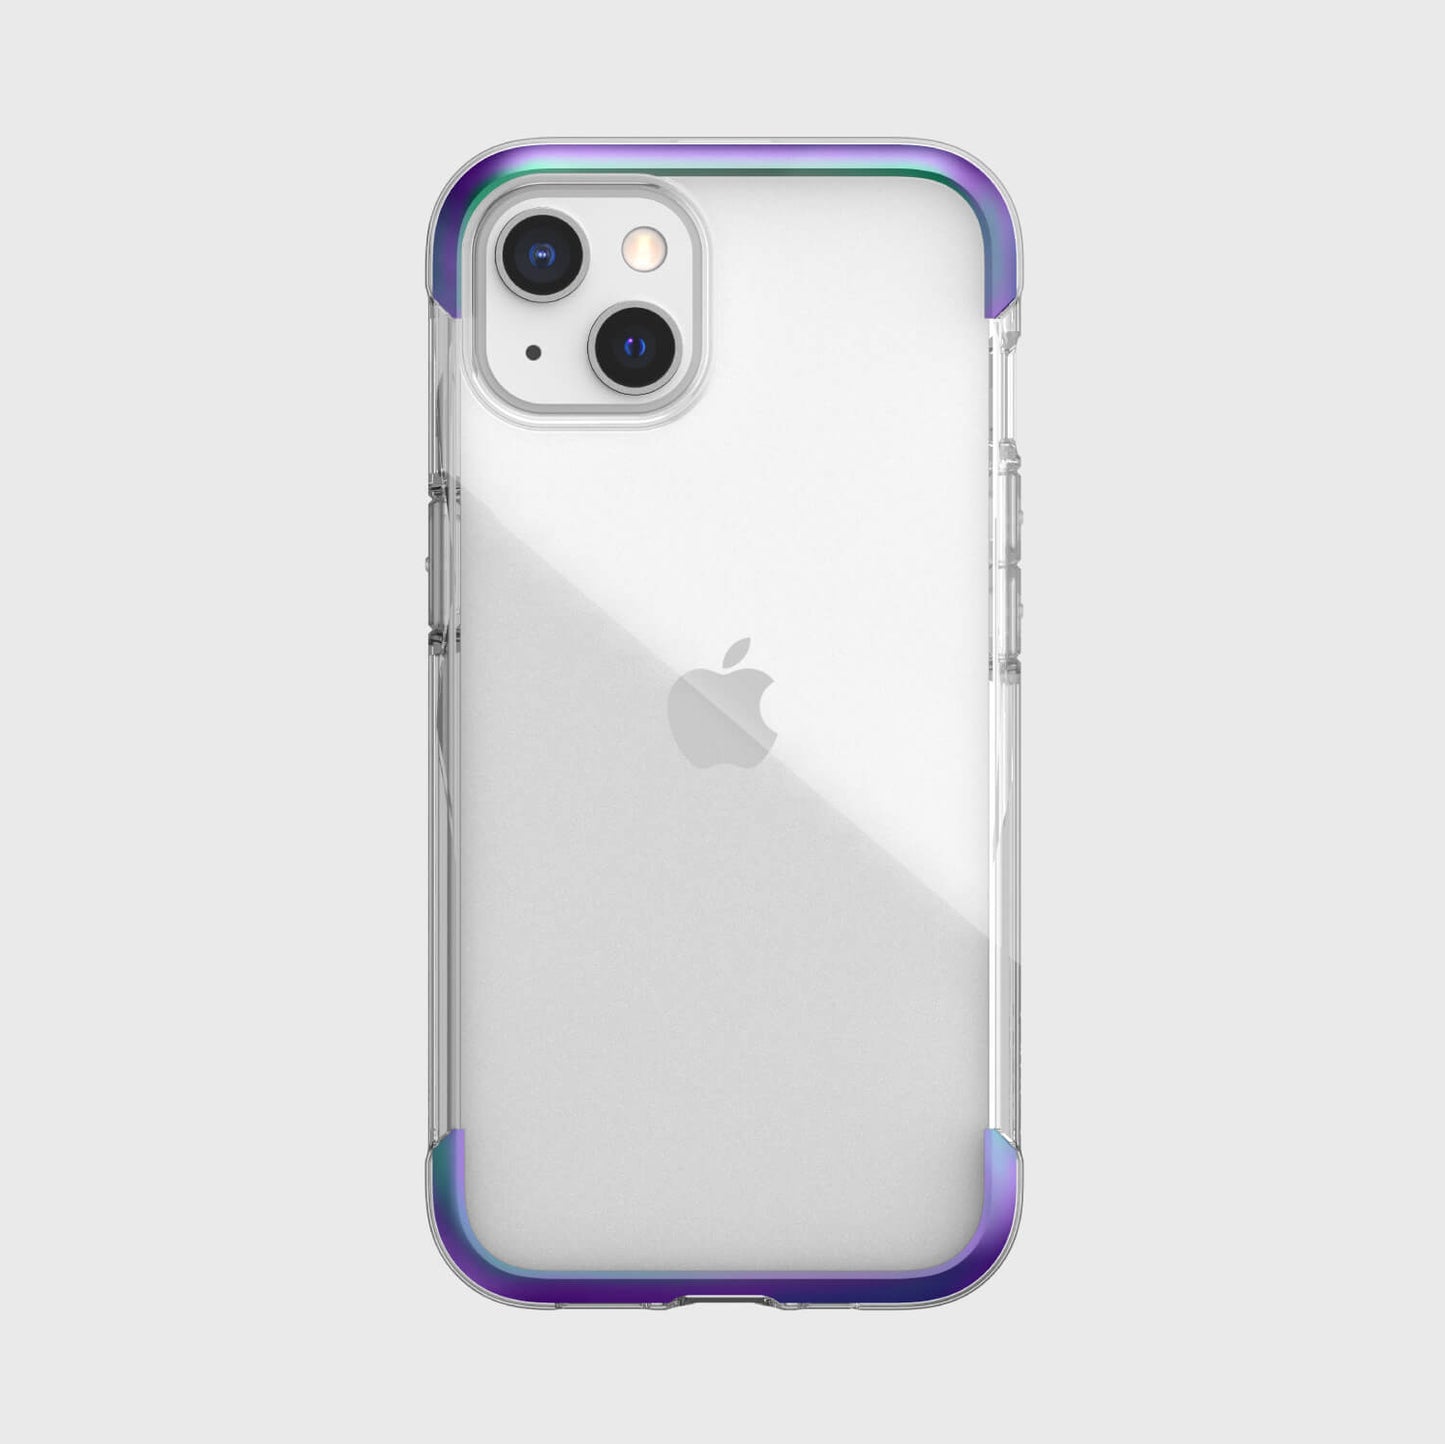 The back of an iPhone 13 Case - AIR with Raptic Air wireless charging and rainbow-colored back.